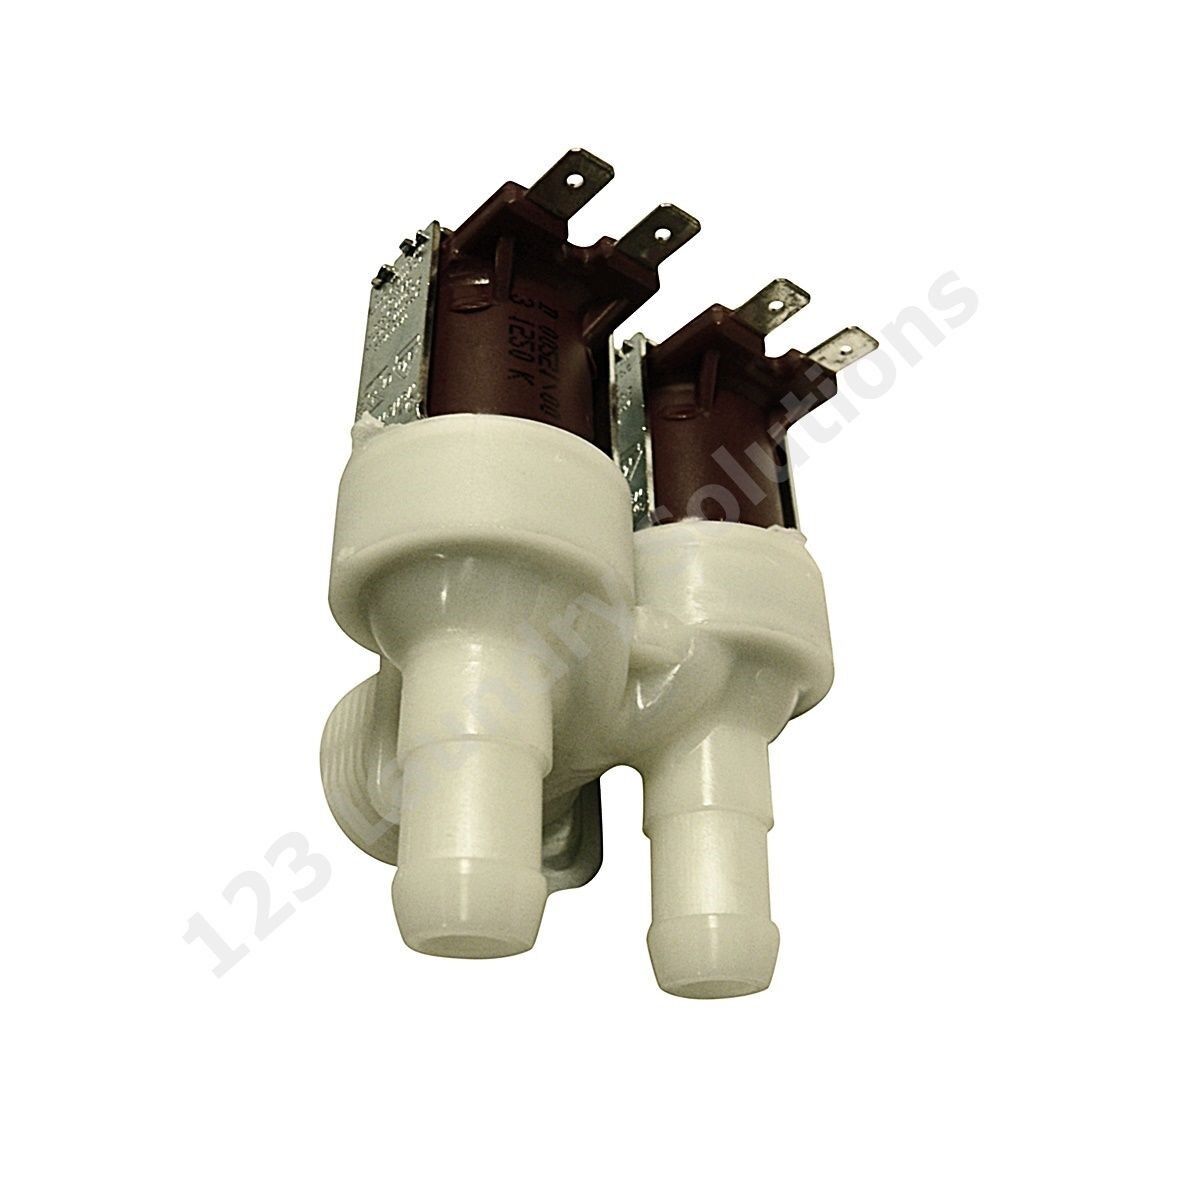 (NEW) Washer Inlet Eaton Valve 2W 220V US EPDM for HUEBSCH B12519501P